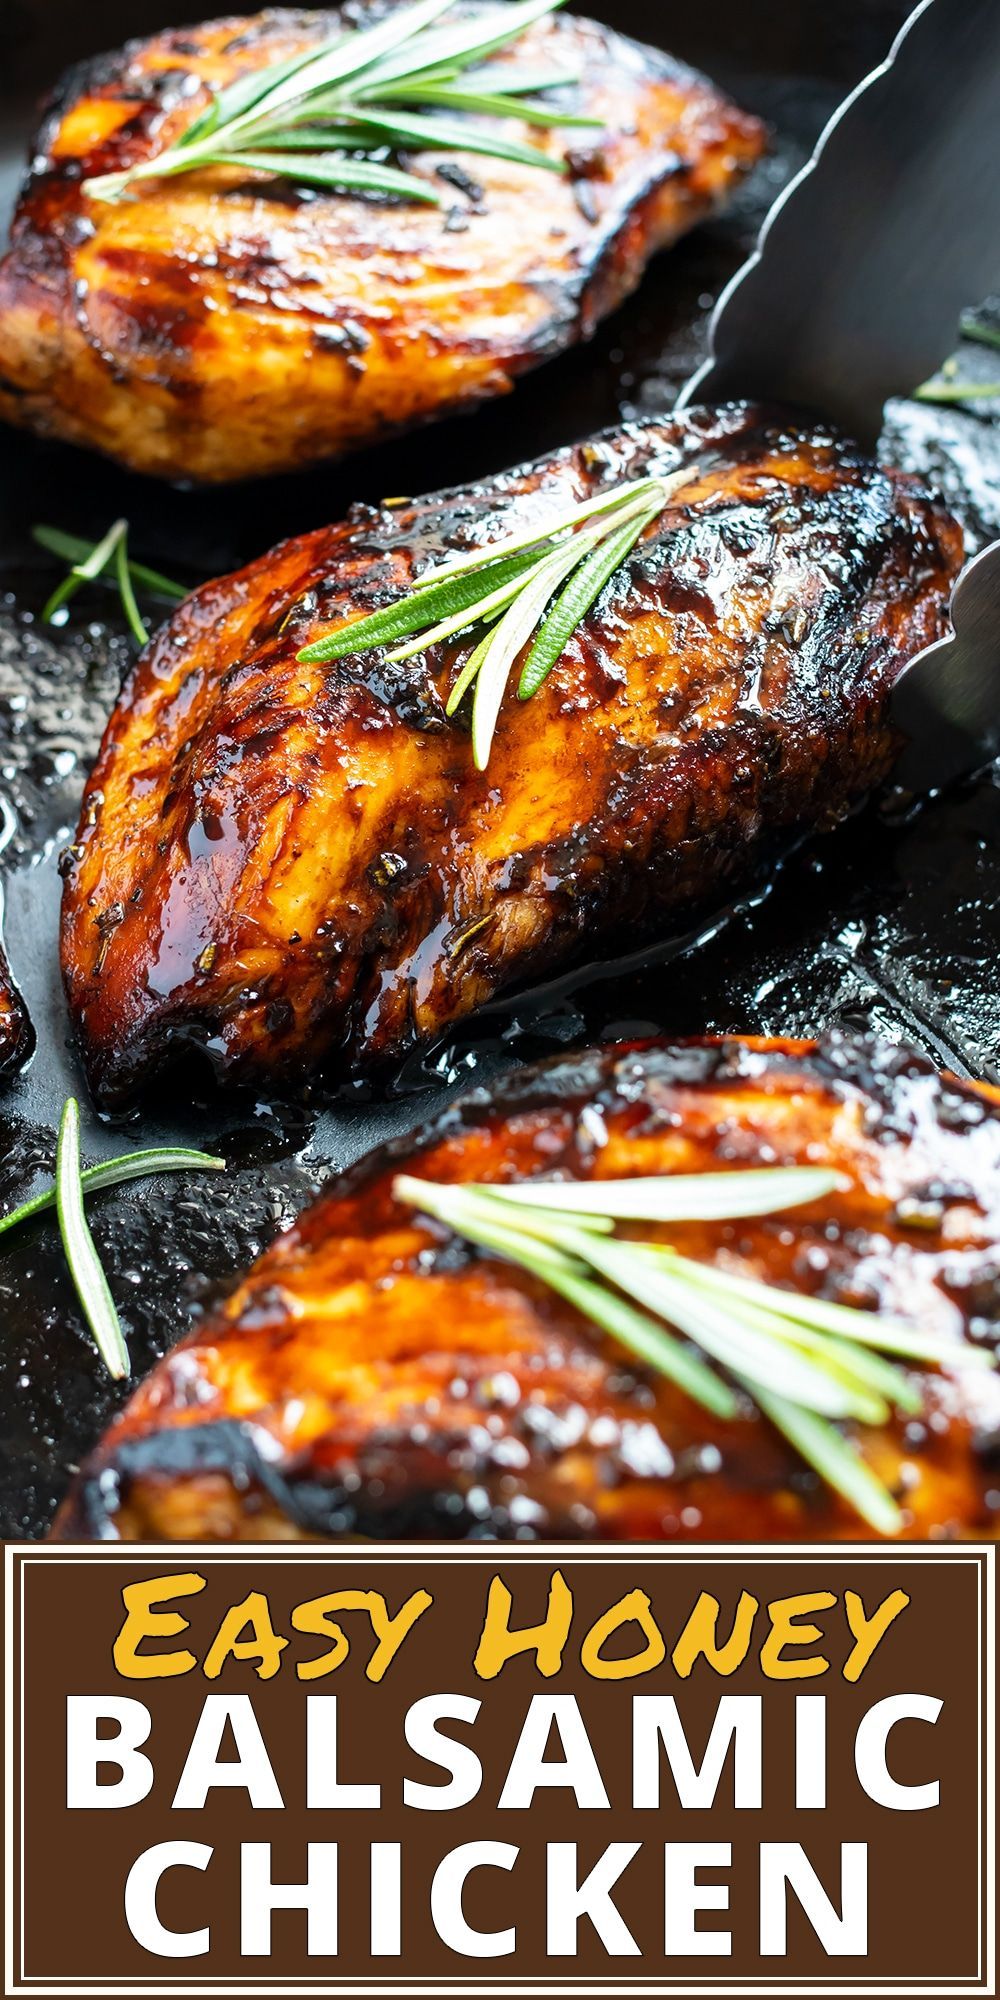 Honey Balsamic Chicken in 30 Minutes! -   17 healthy recipes For One main dishes ideas